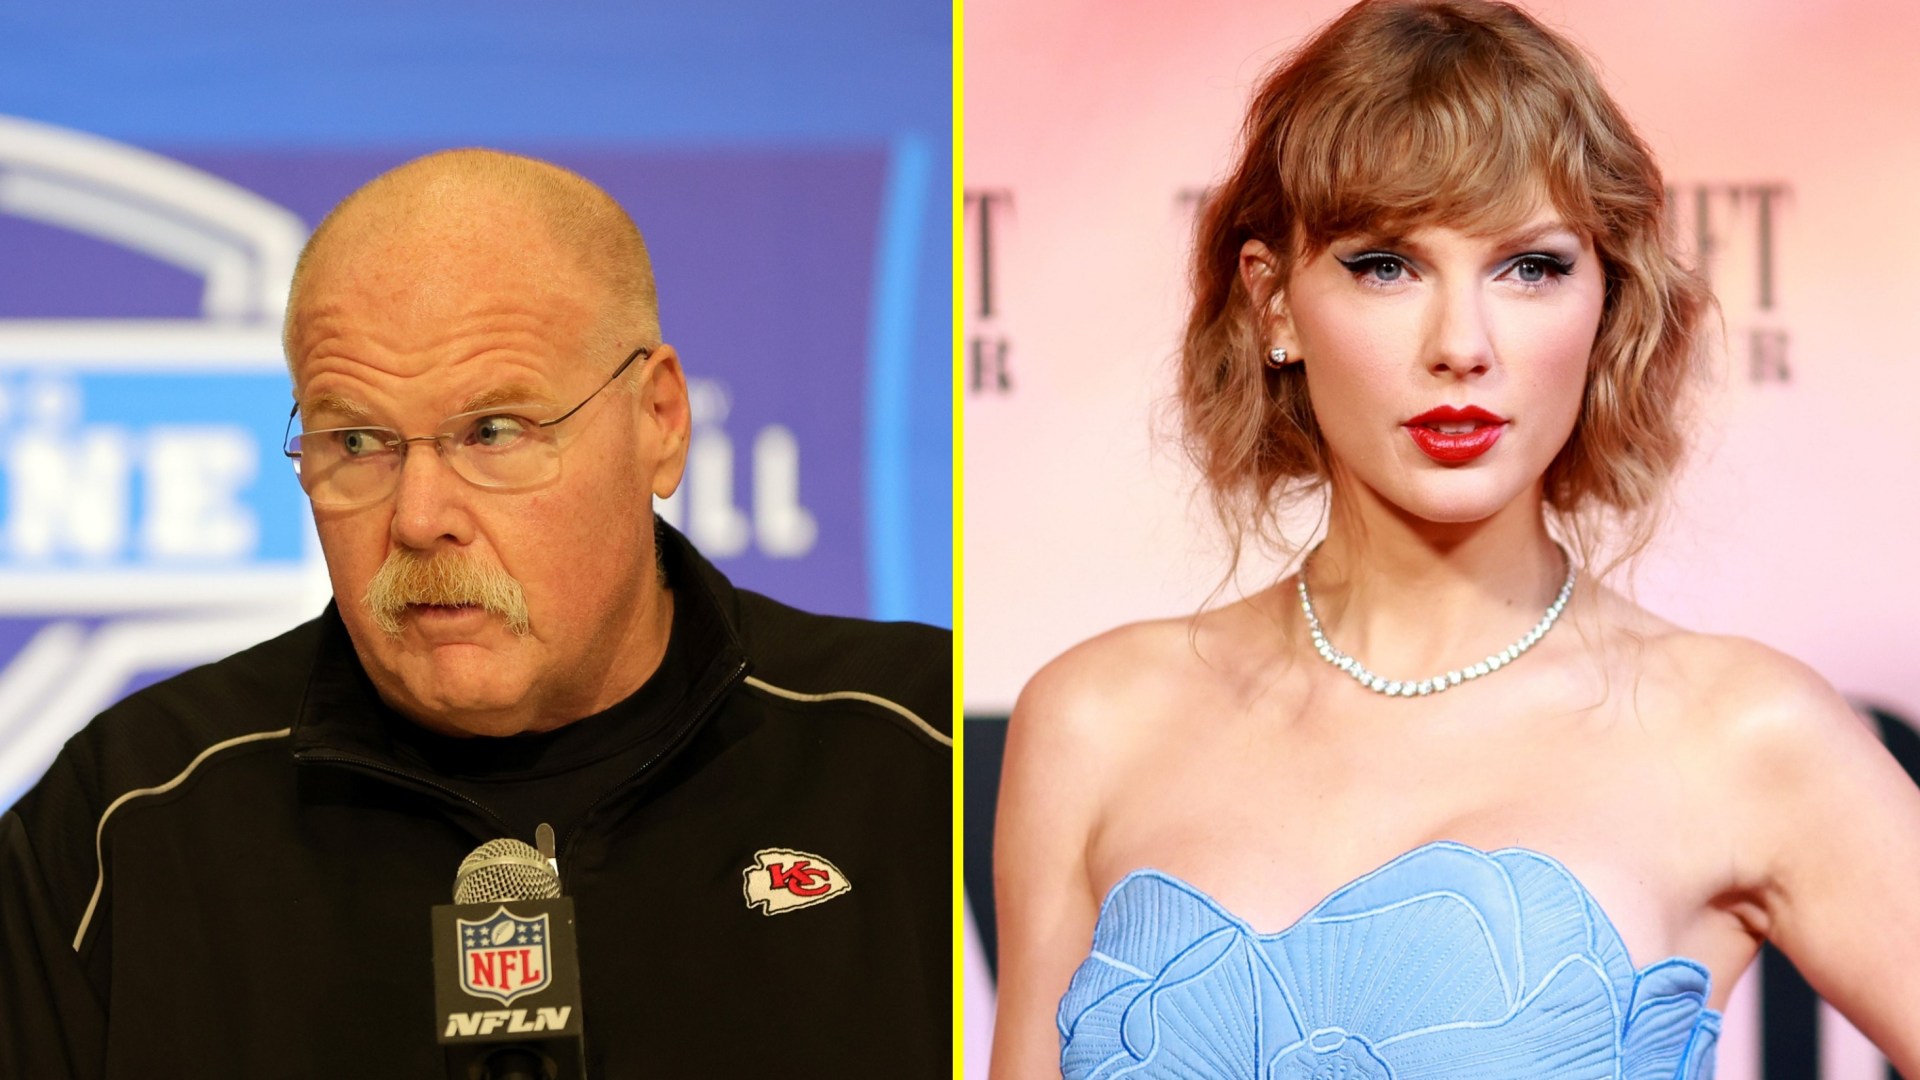 Chiefs coach Andy Reid has no problem with Taylor Swift being around - except one time she hurt his feelings